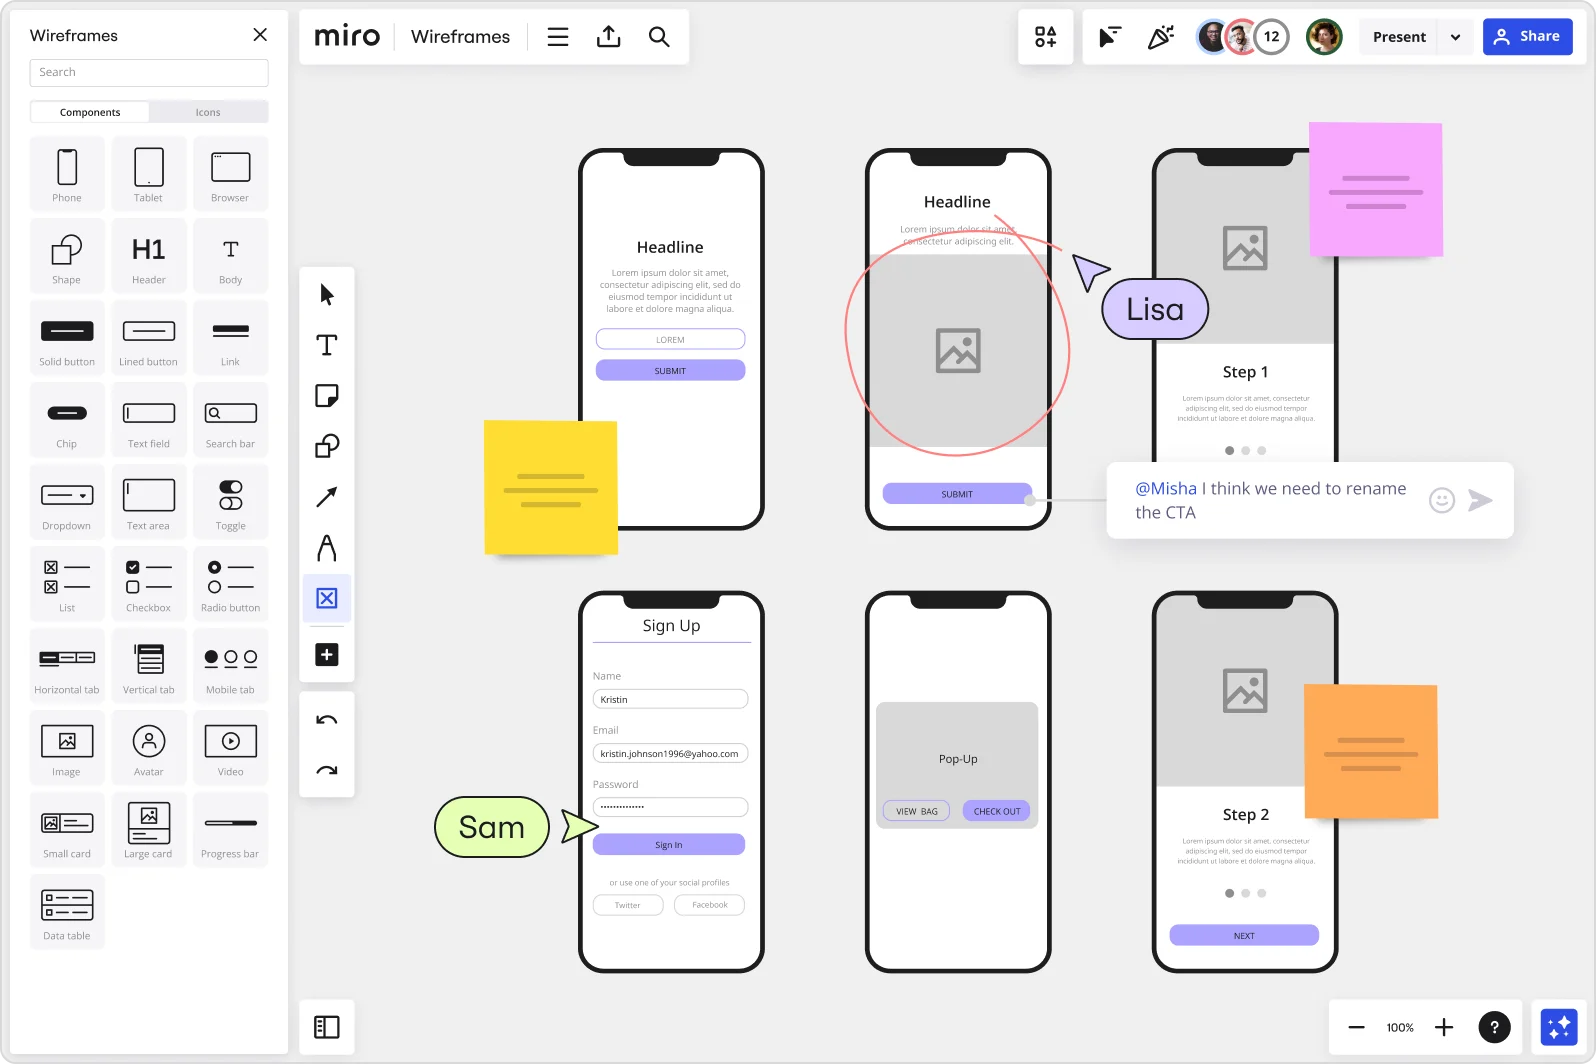 Image showing Miro's wireframe maker used collaboratively in real-time